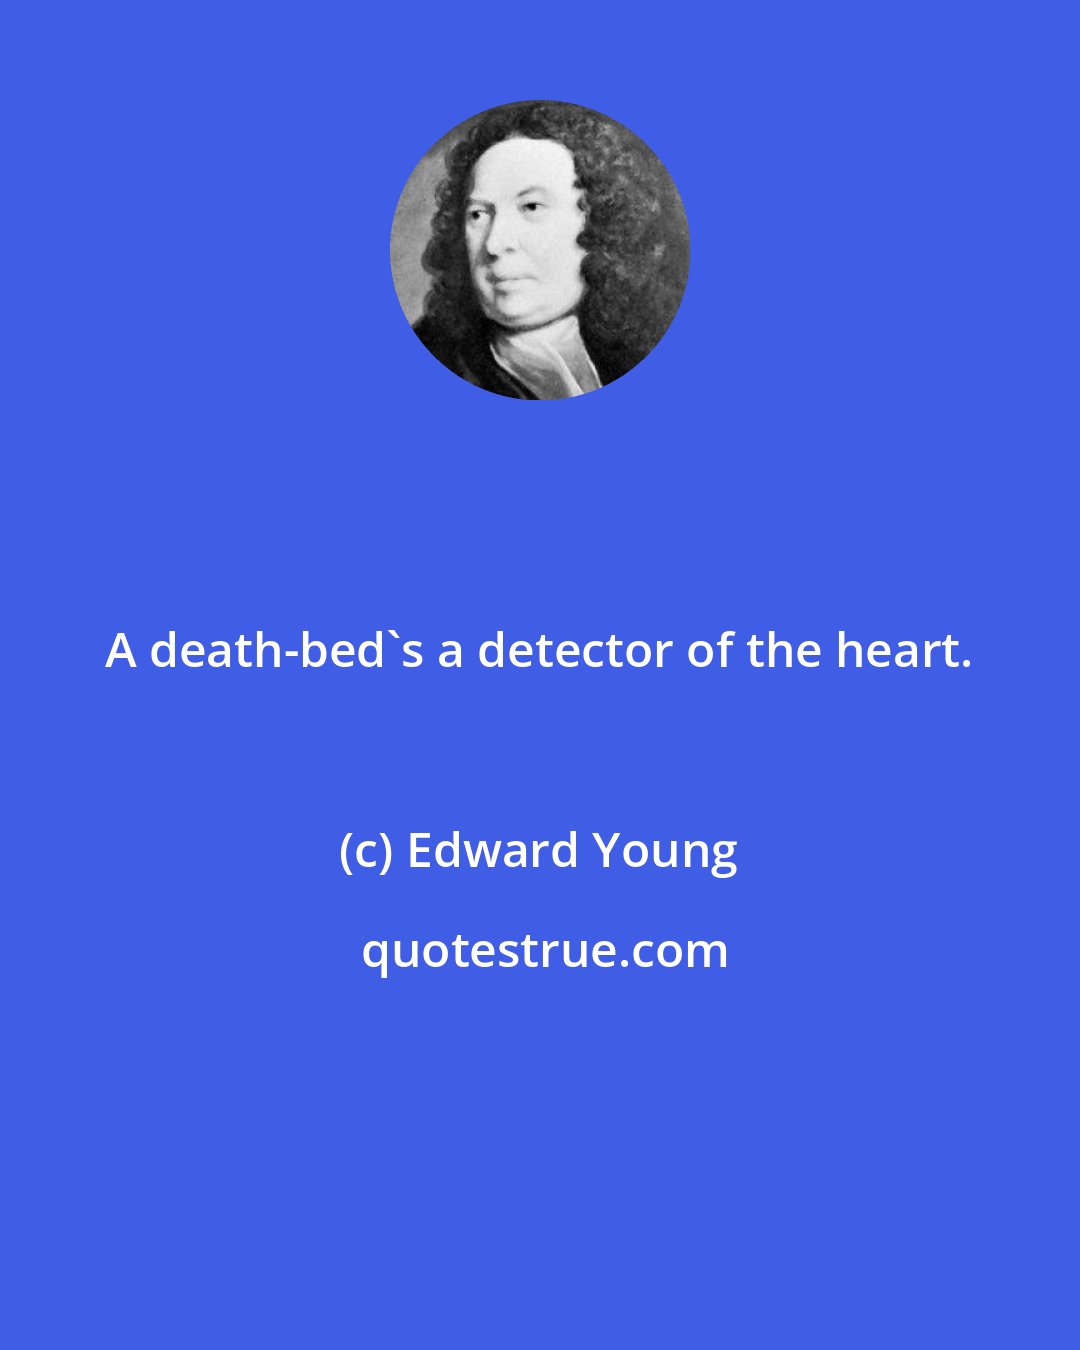 Edward Young: A death-bed's a detector of the heart.